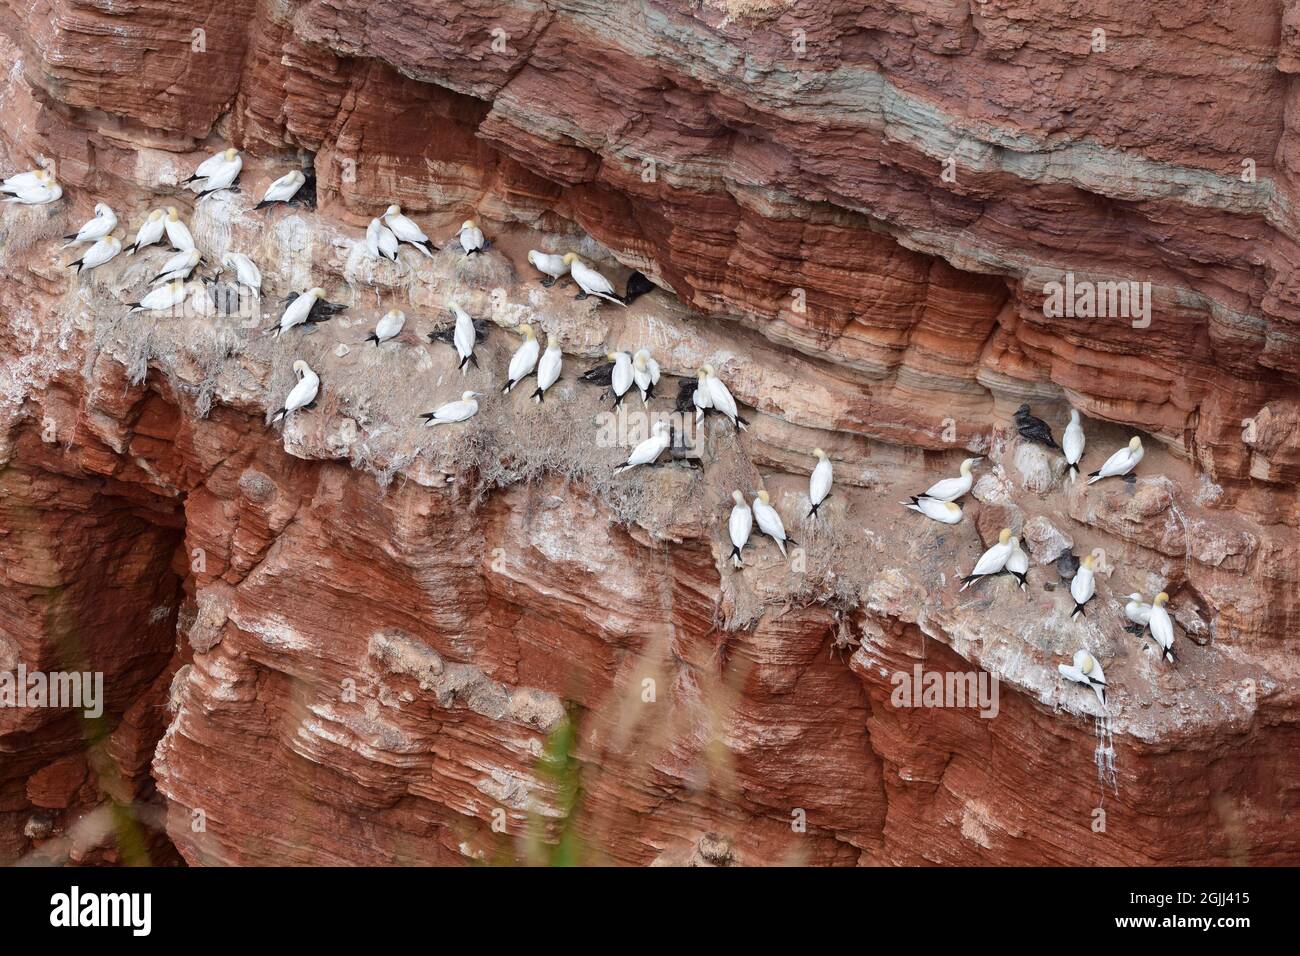 Northern gannets in a red steep coastwall Stock Photo